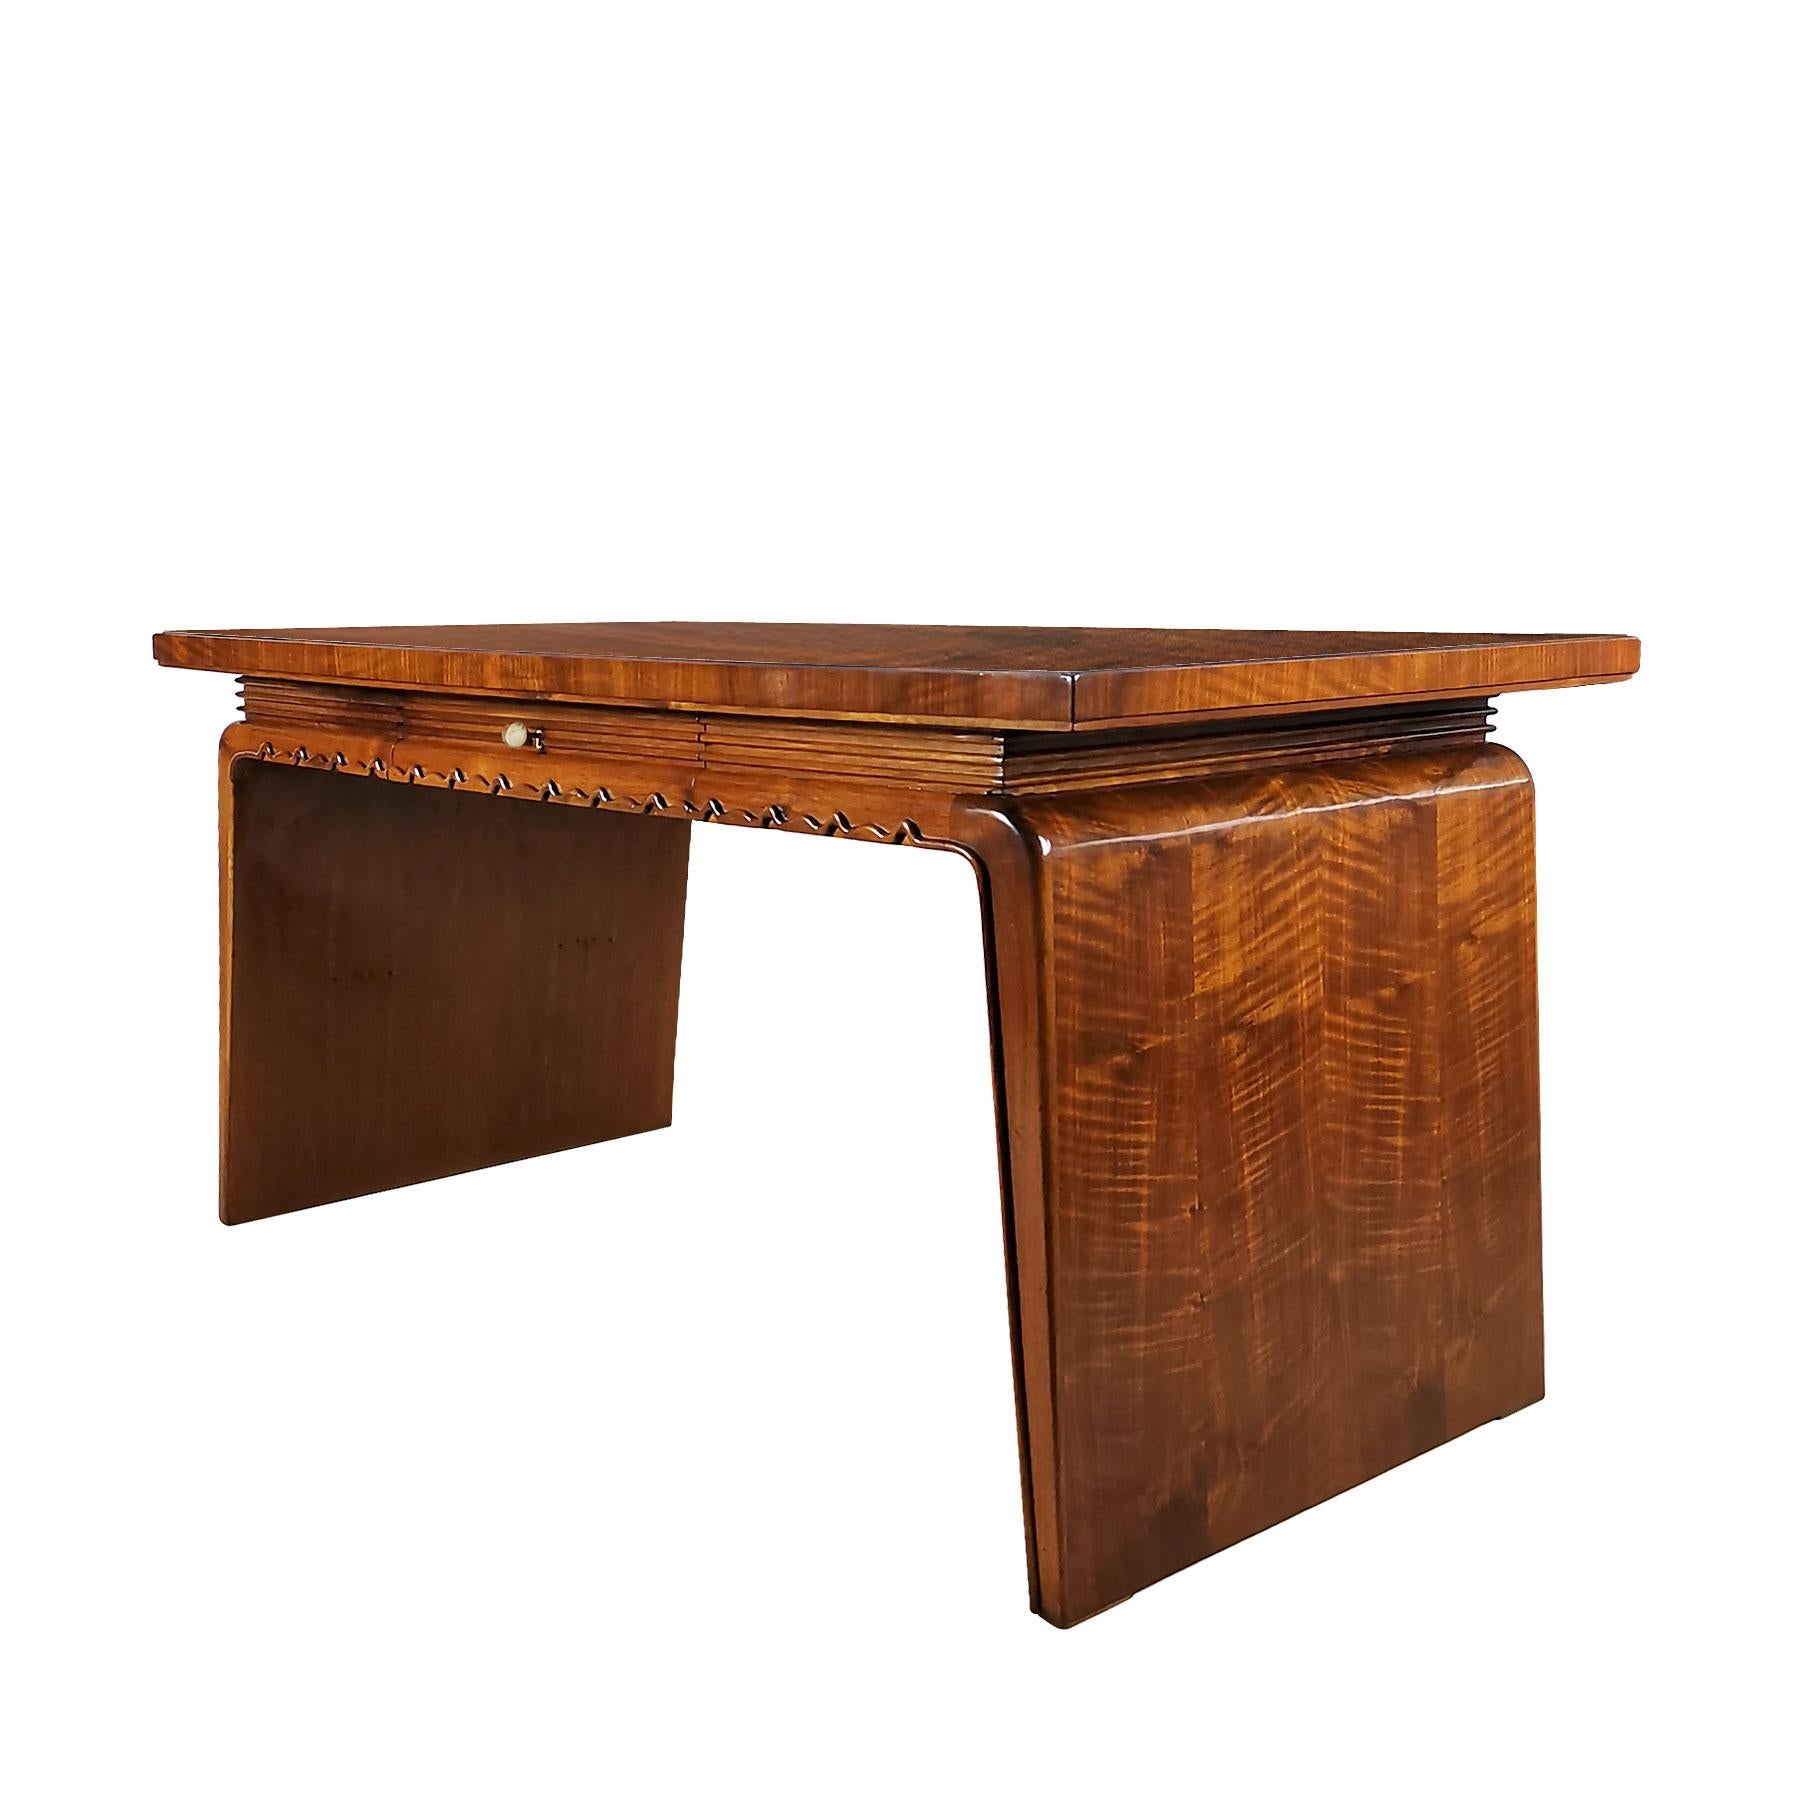 Art Deco flat desk with one-drawer, beech structure with walnut veneer. Japanese inspired base with a solid walnut undulant moulding as the encircled base of top and drawer, French polish.

Italy, circa 1930.